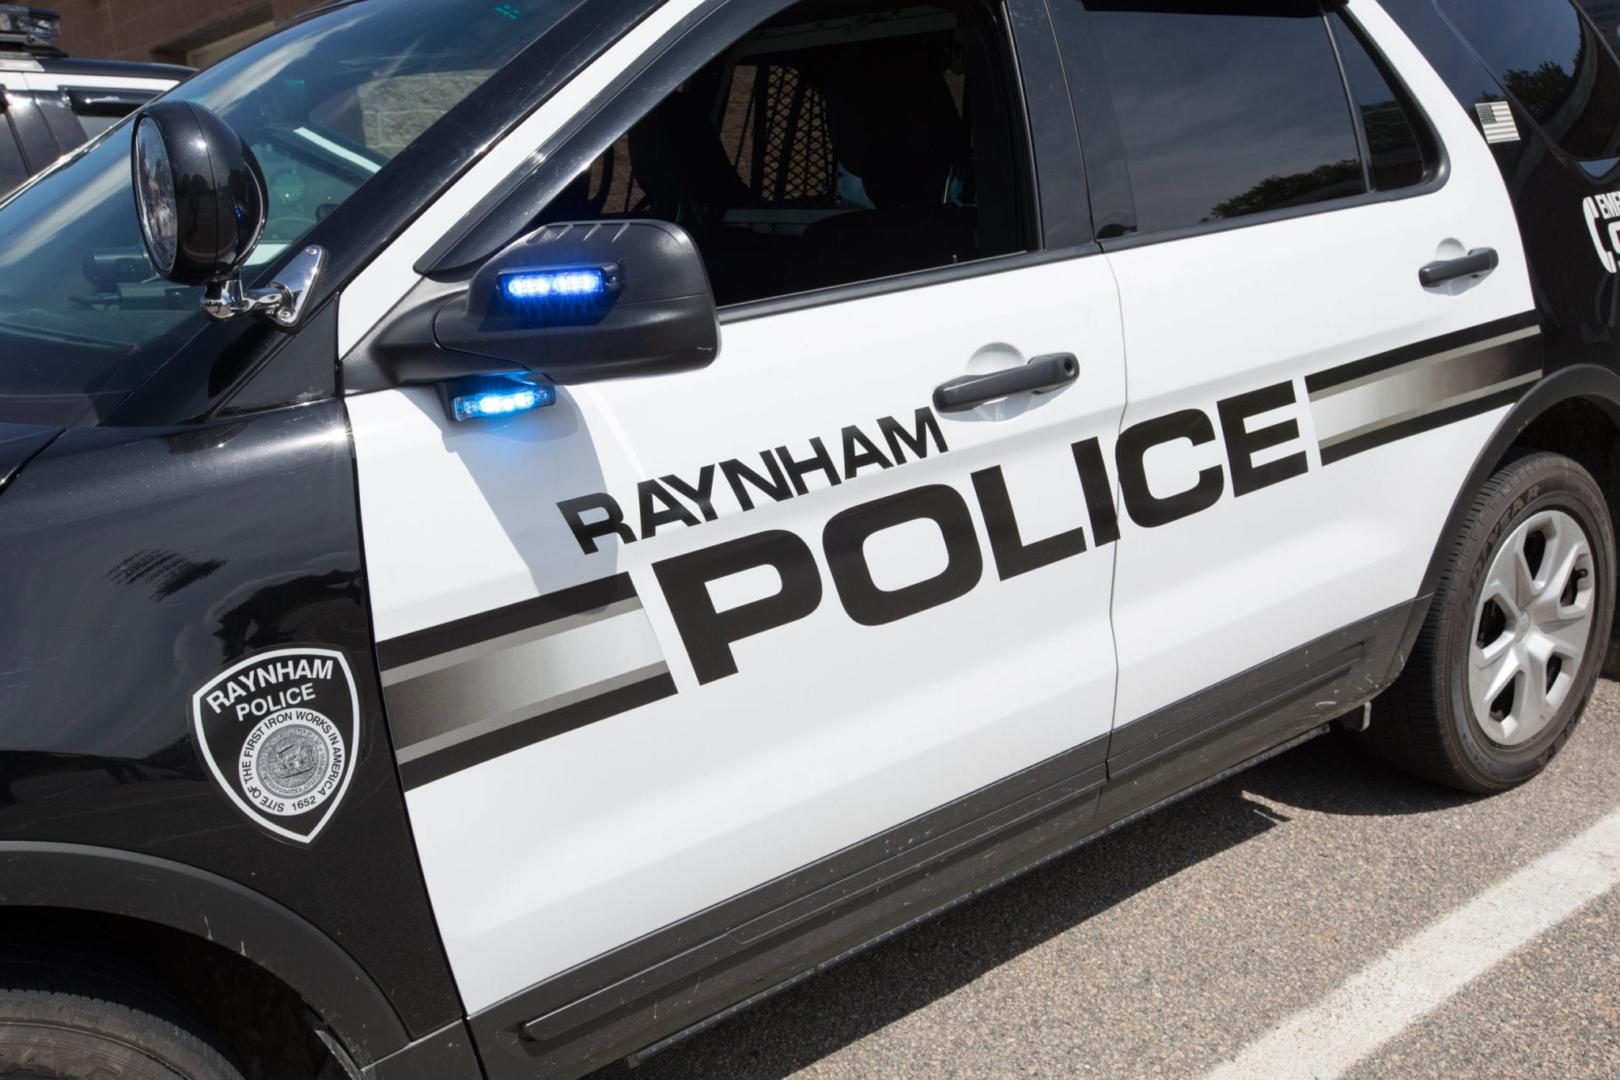 About the Raynham Police Department